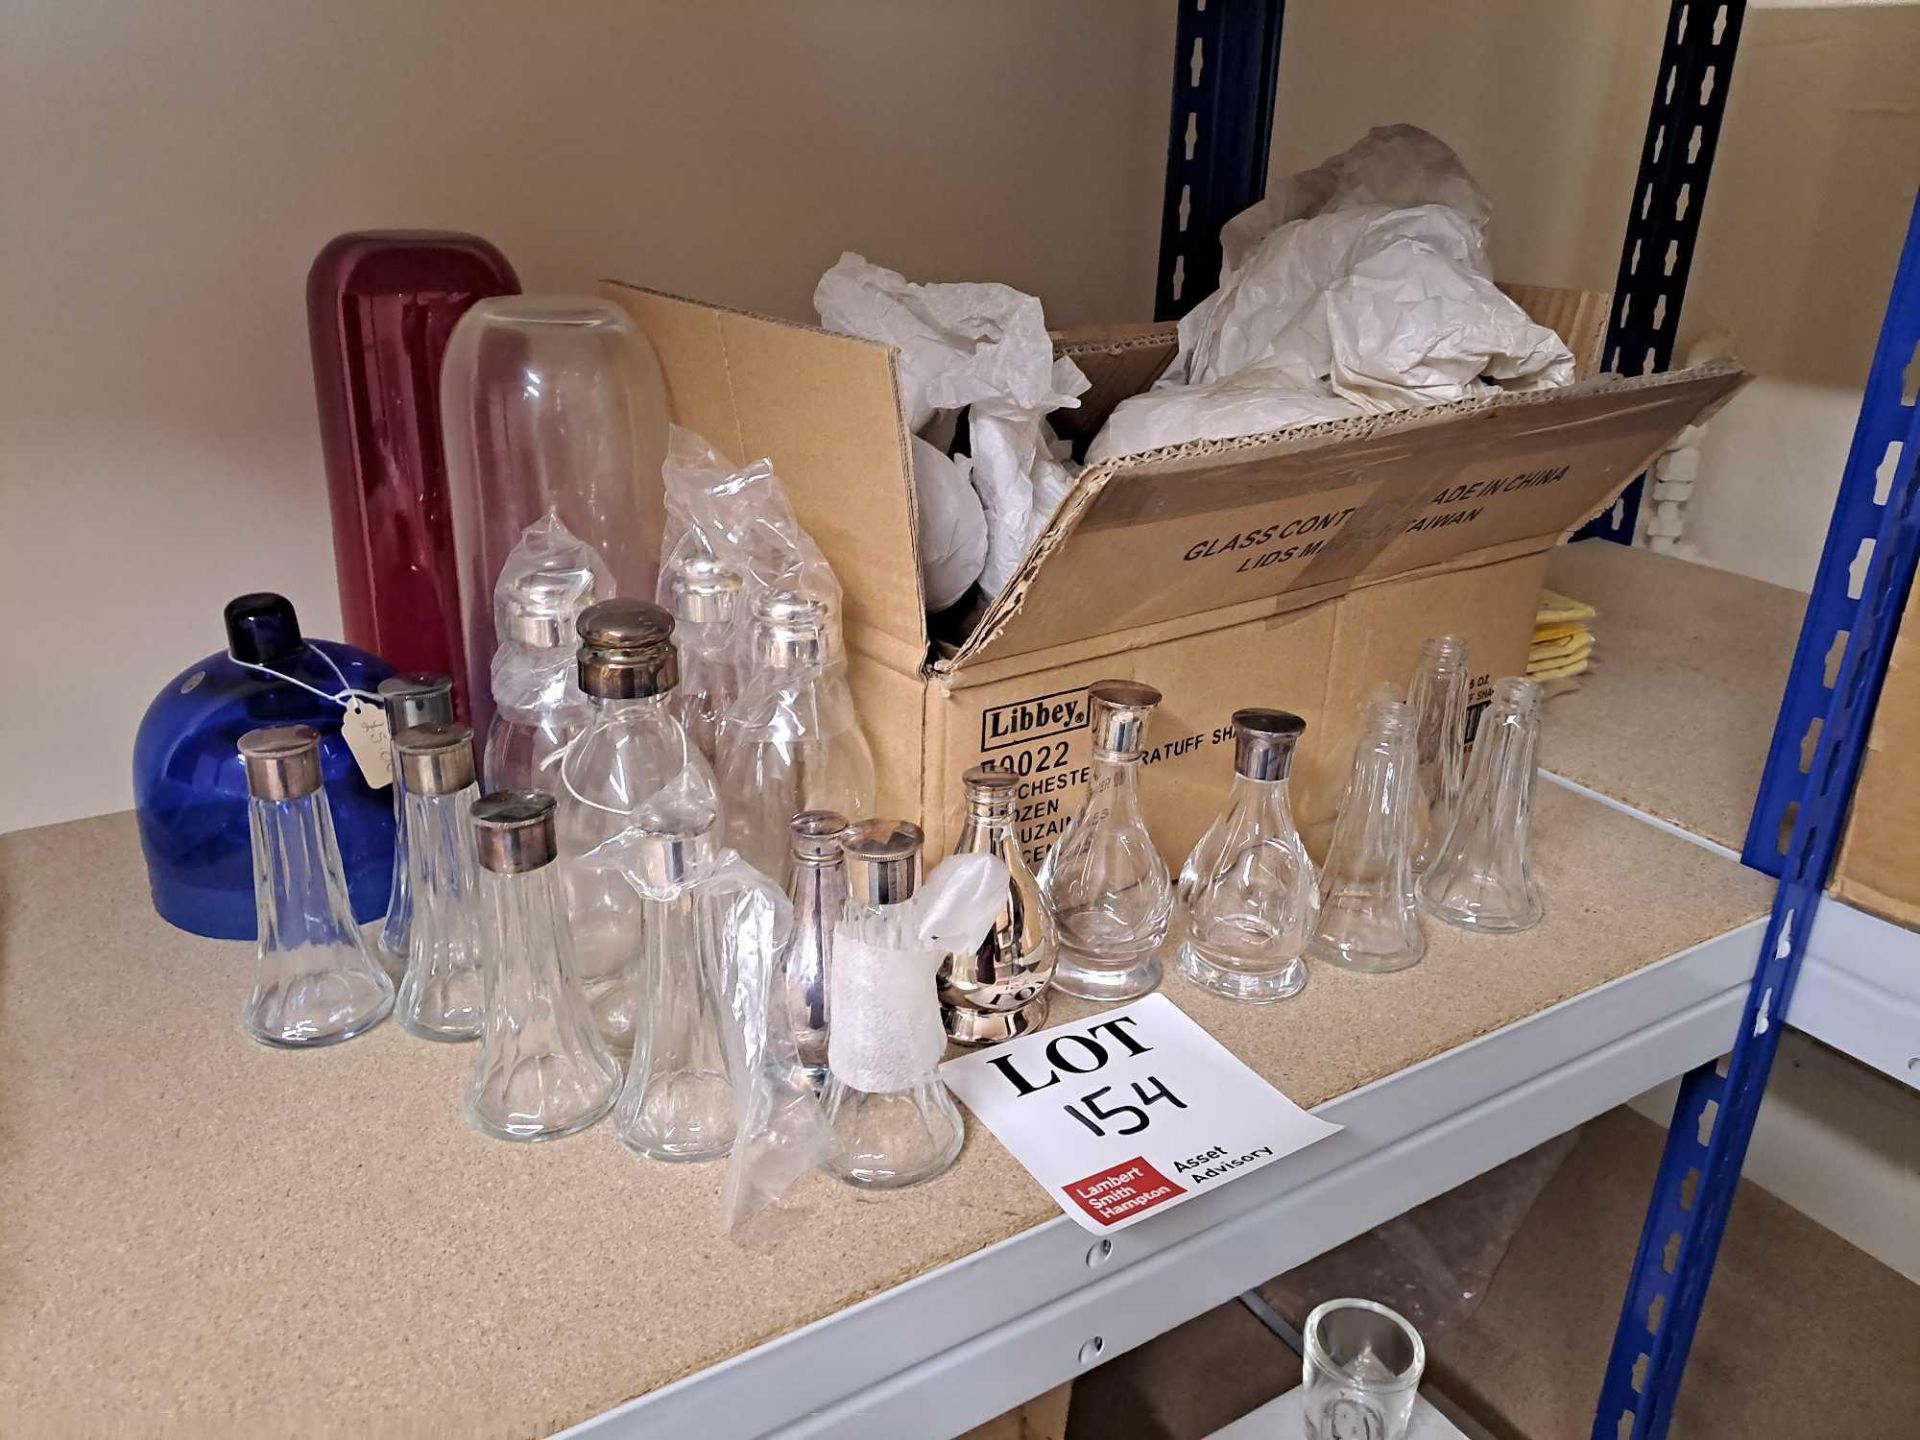 Assortment of various glass decanters